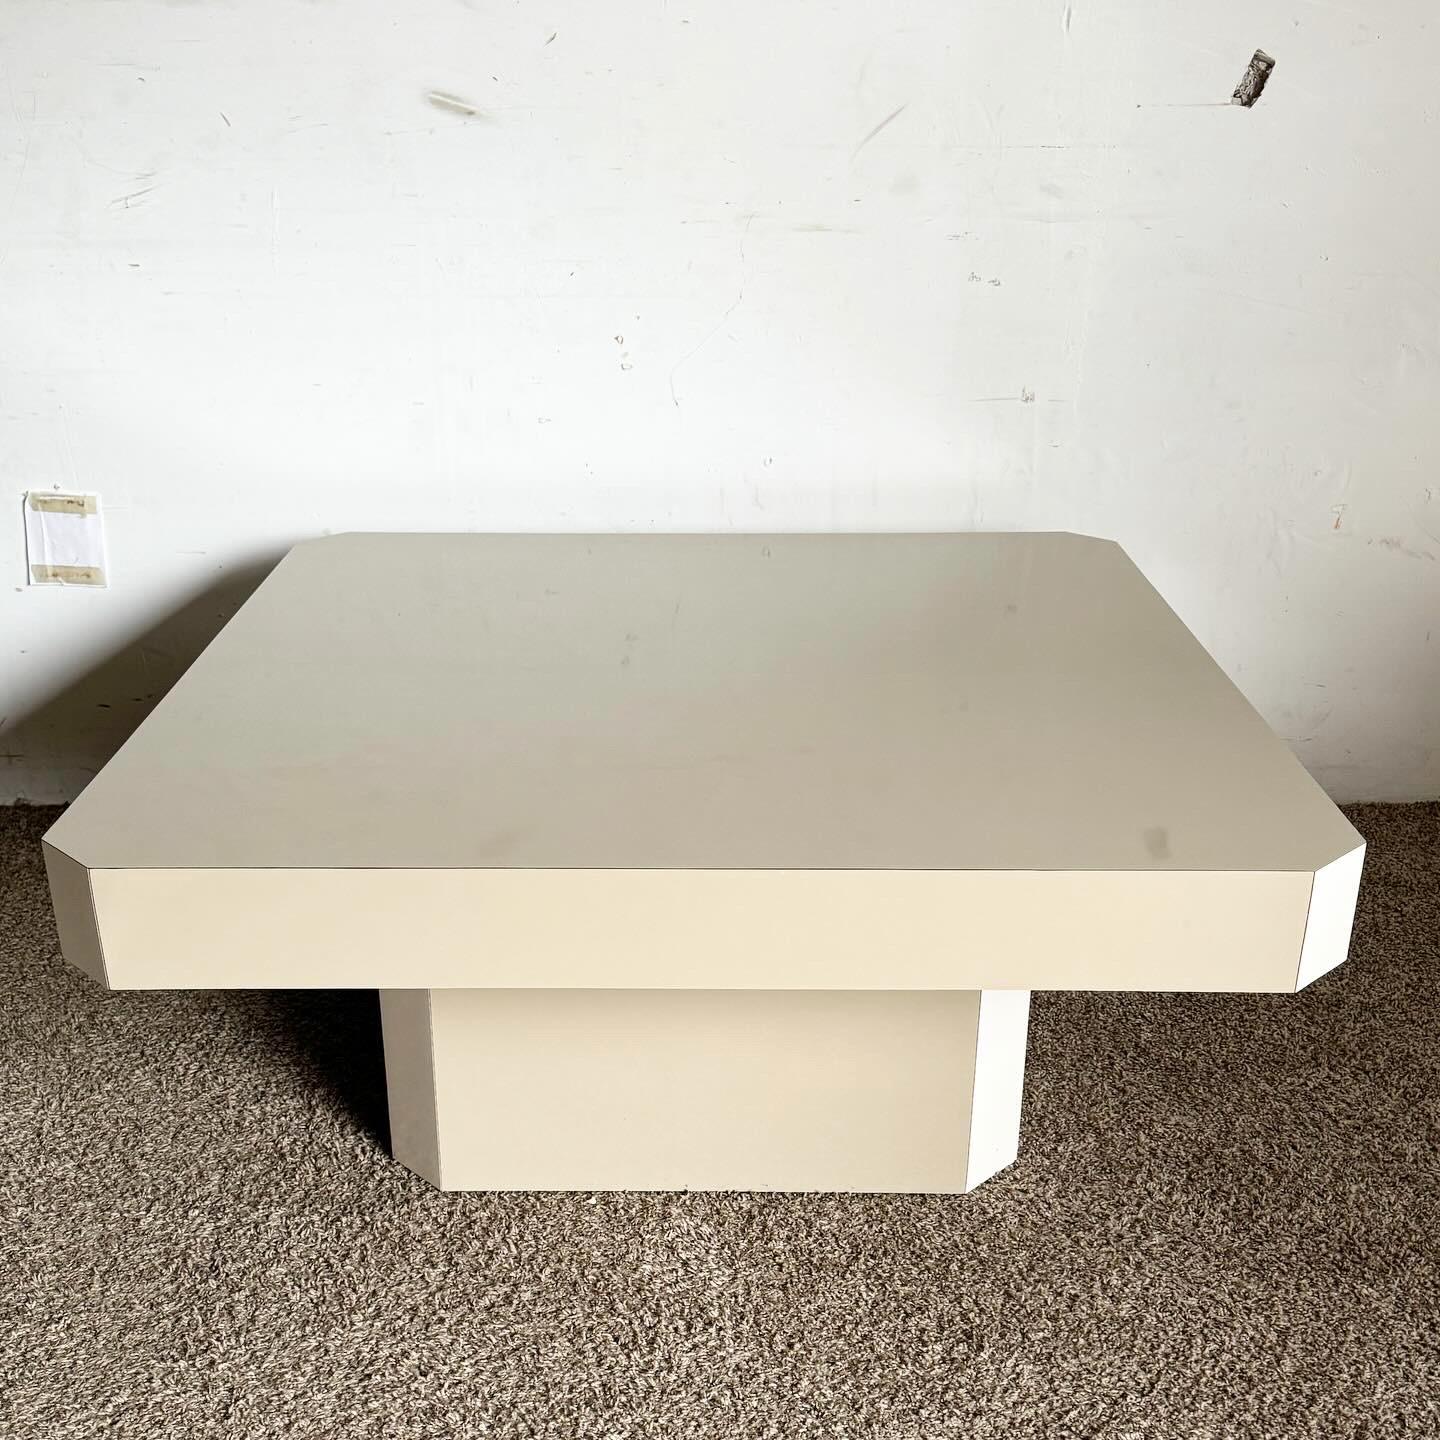 Postmodern Tan and White Lacquer Laminate Coffee Table In Good Condition For Sale In Delray Beach, FL